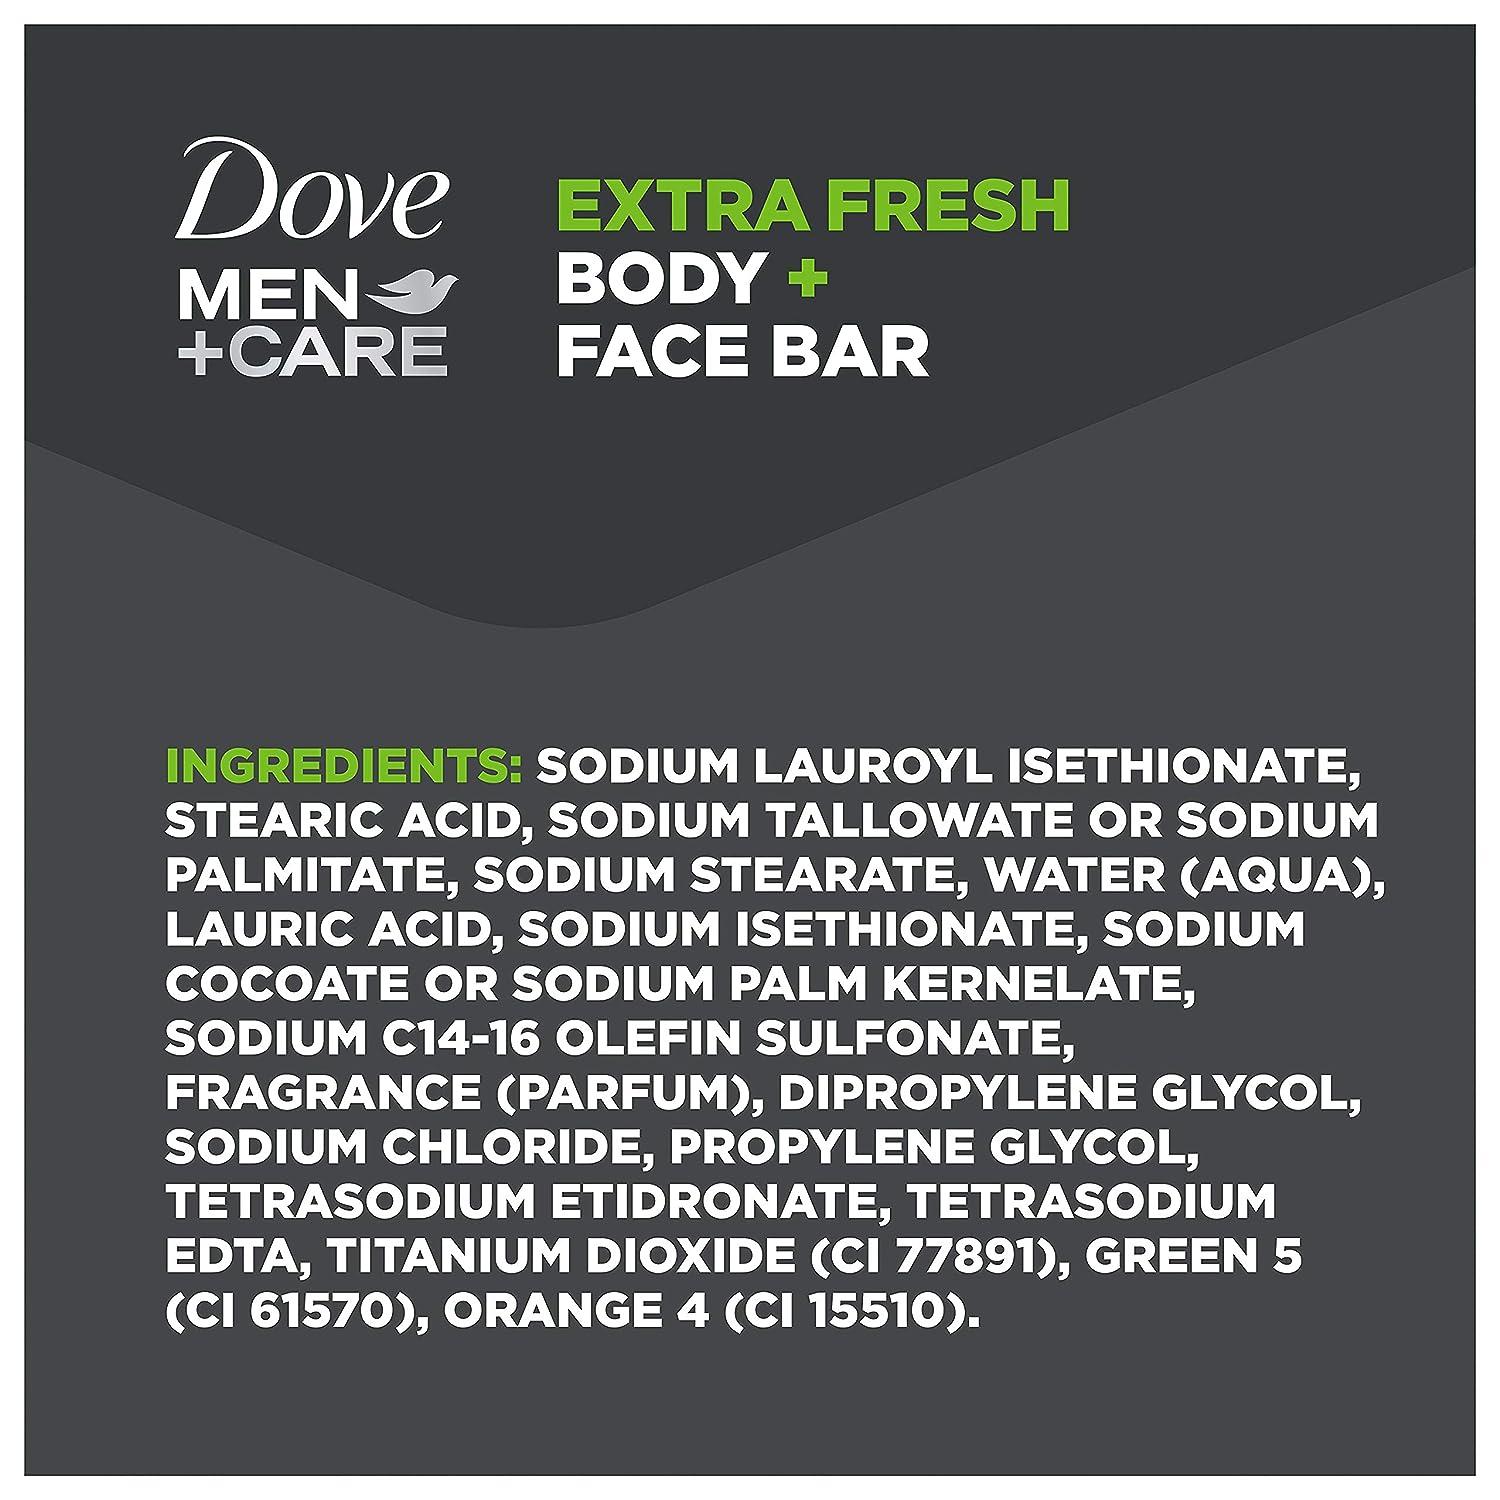 Dove Men+Care Extra Fresh Refreshing Hand, Body and Face Bar 3.75 Oz 8 Bars